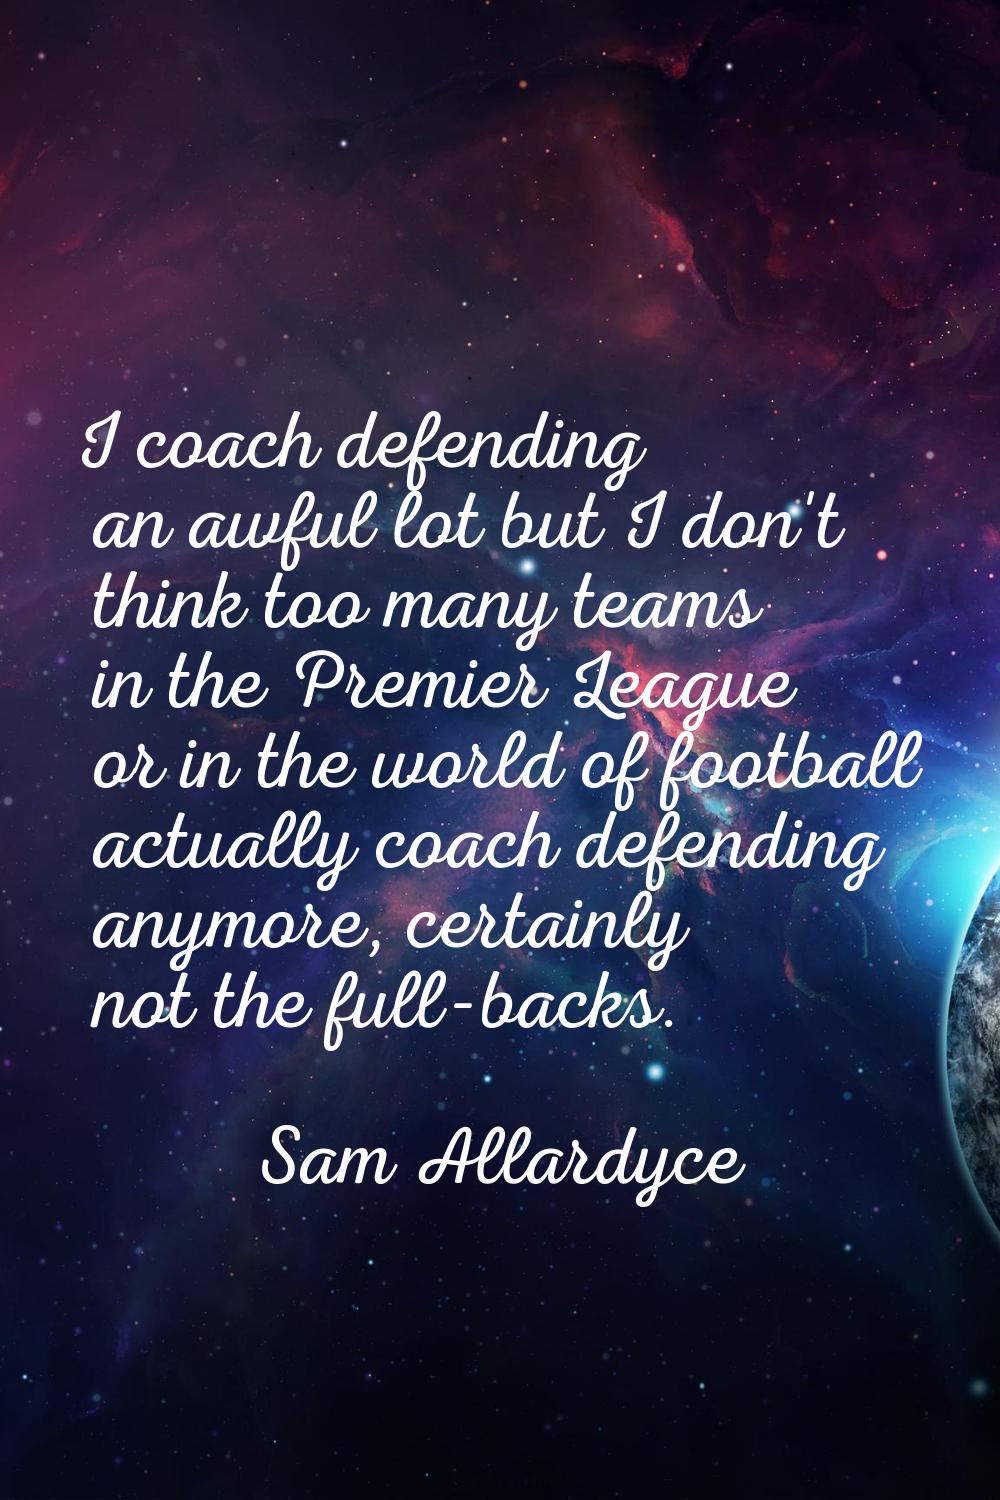 I coach defending an awful lot but I don't think too many teams in the Premier League or in the wor